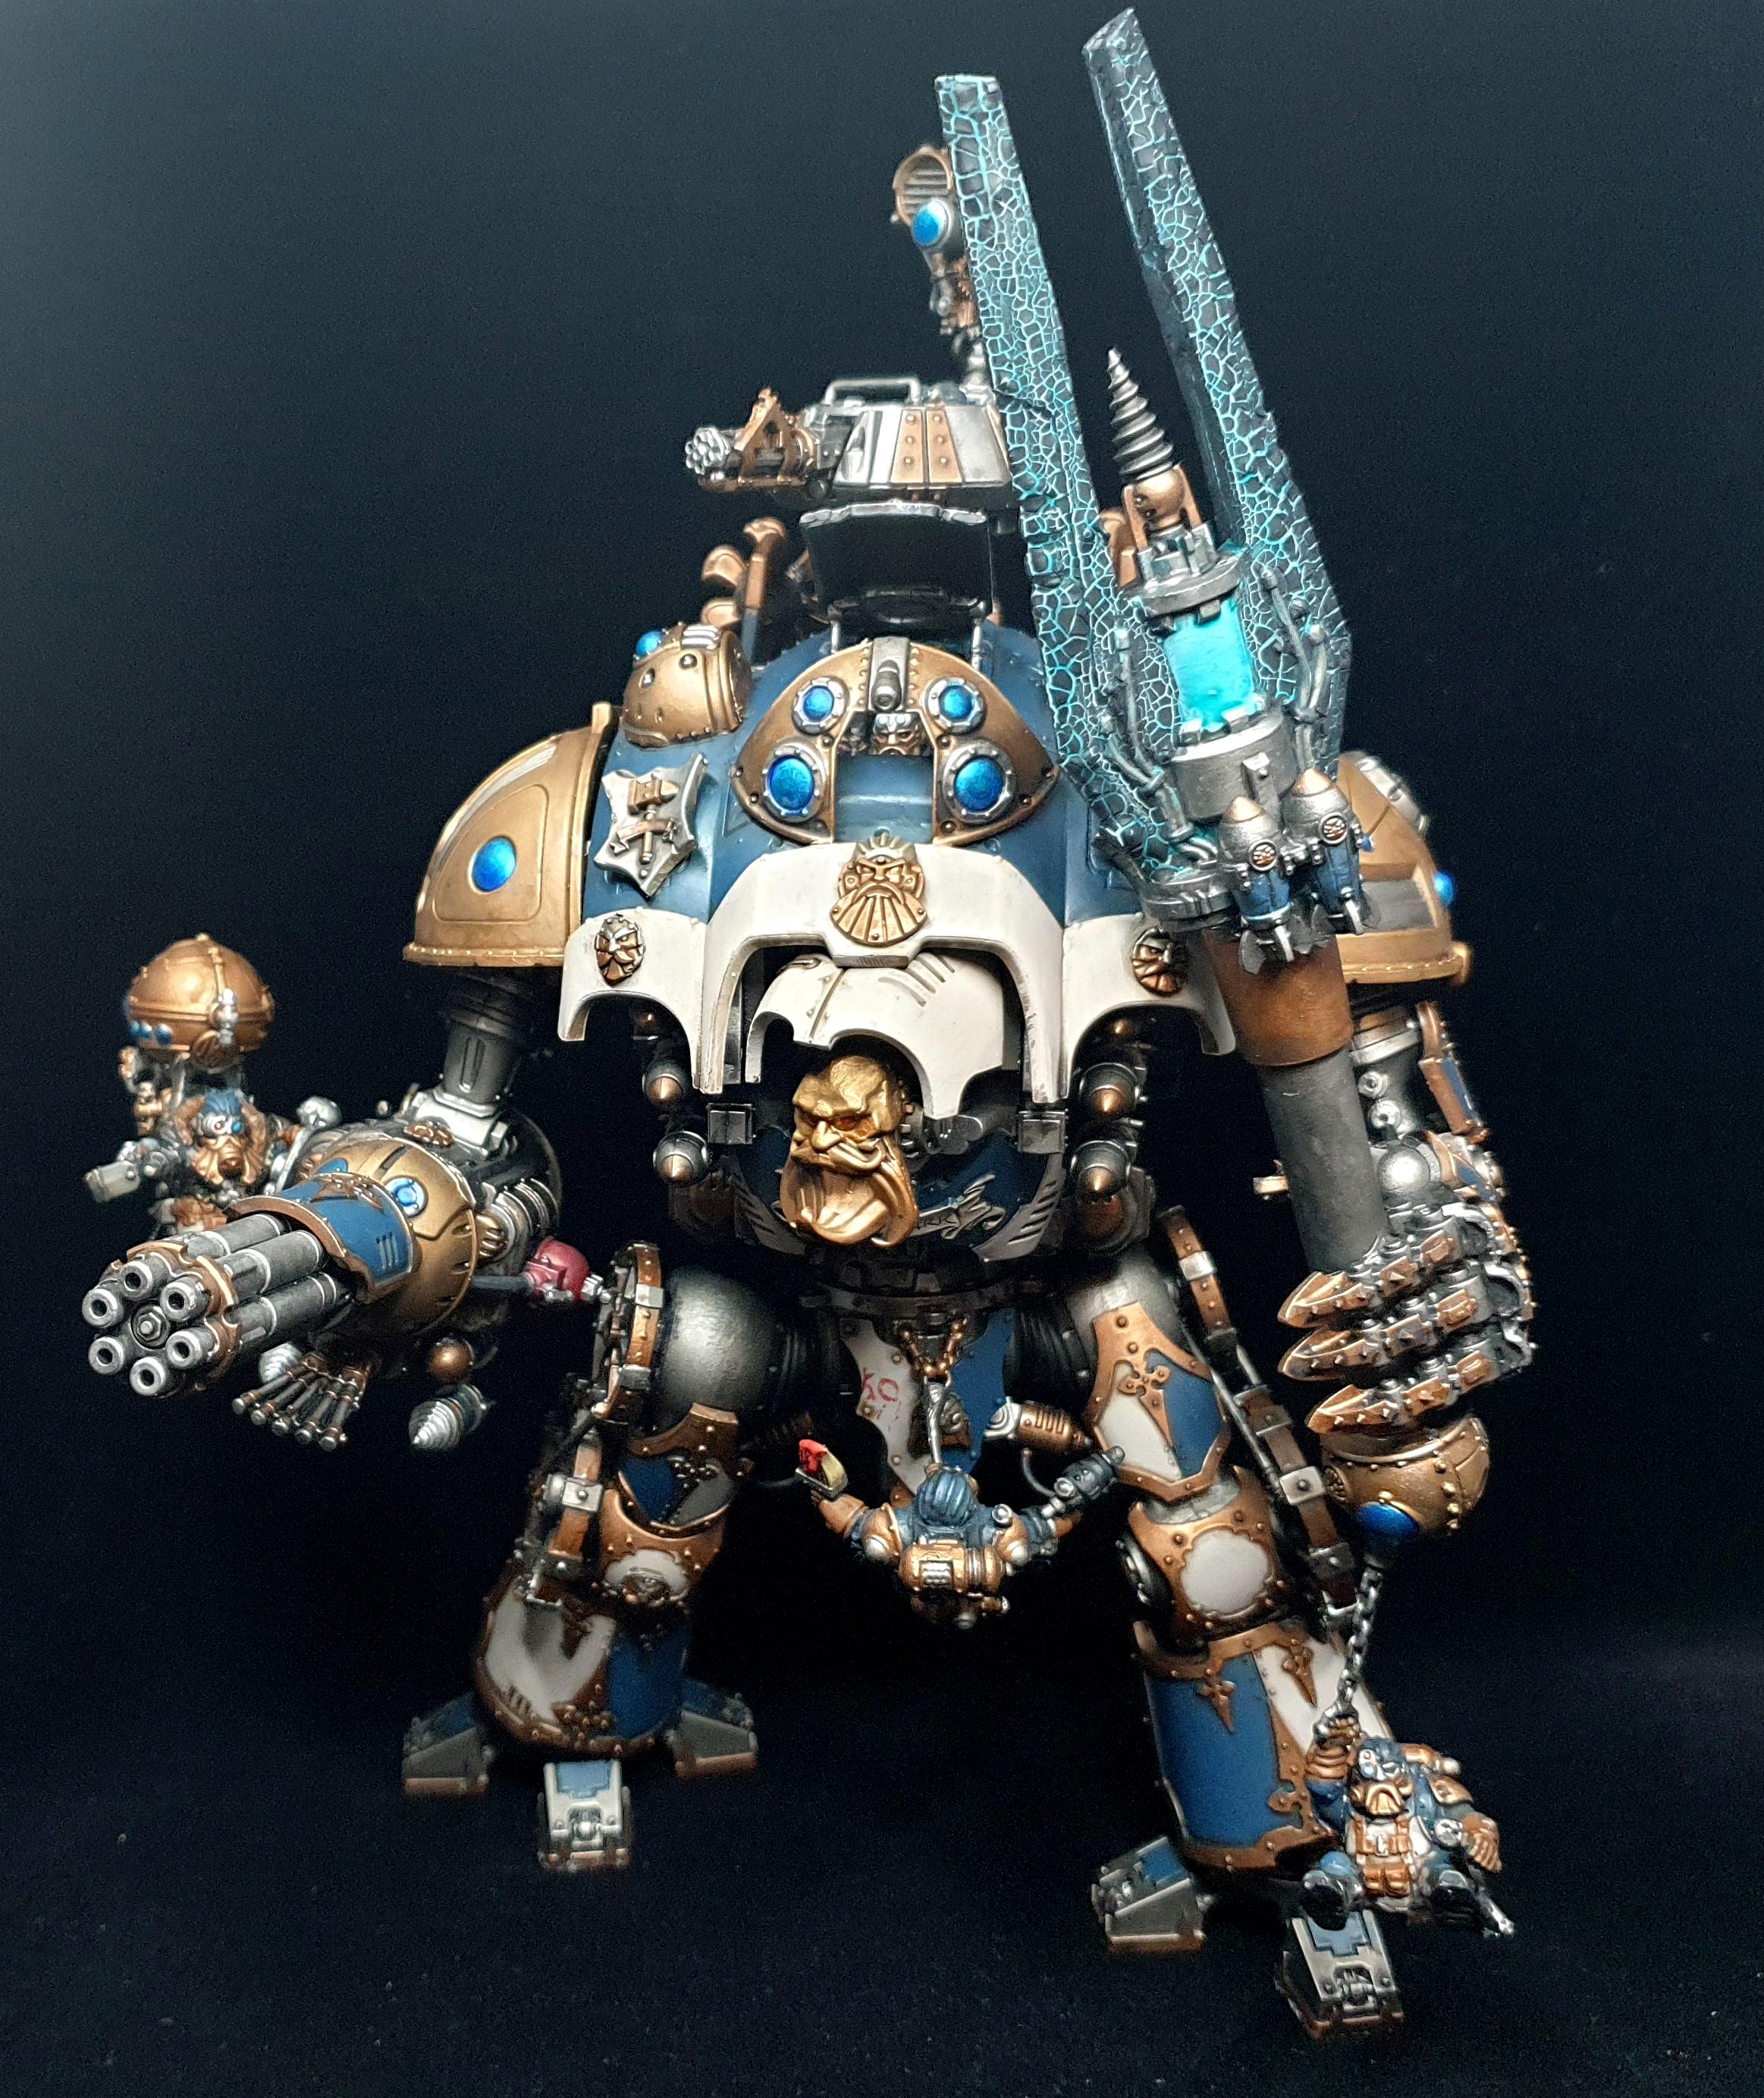 Age Of Sigmar, Cities Of Sigmar, Dwarves, Kharadron Overlords, Knights, Steampunk, Walker